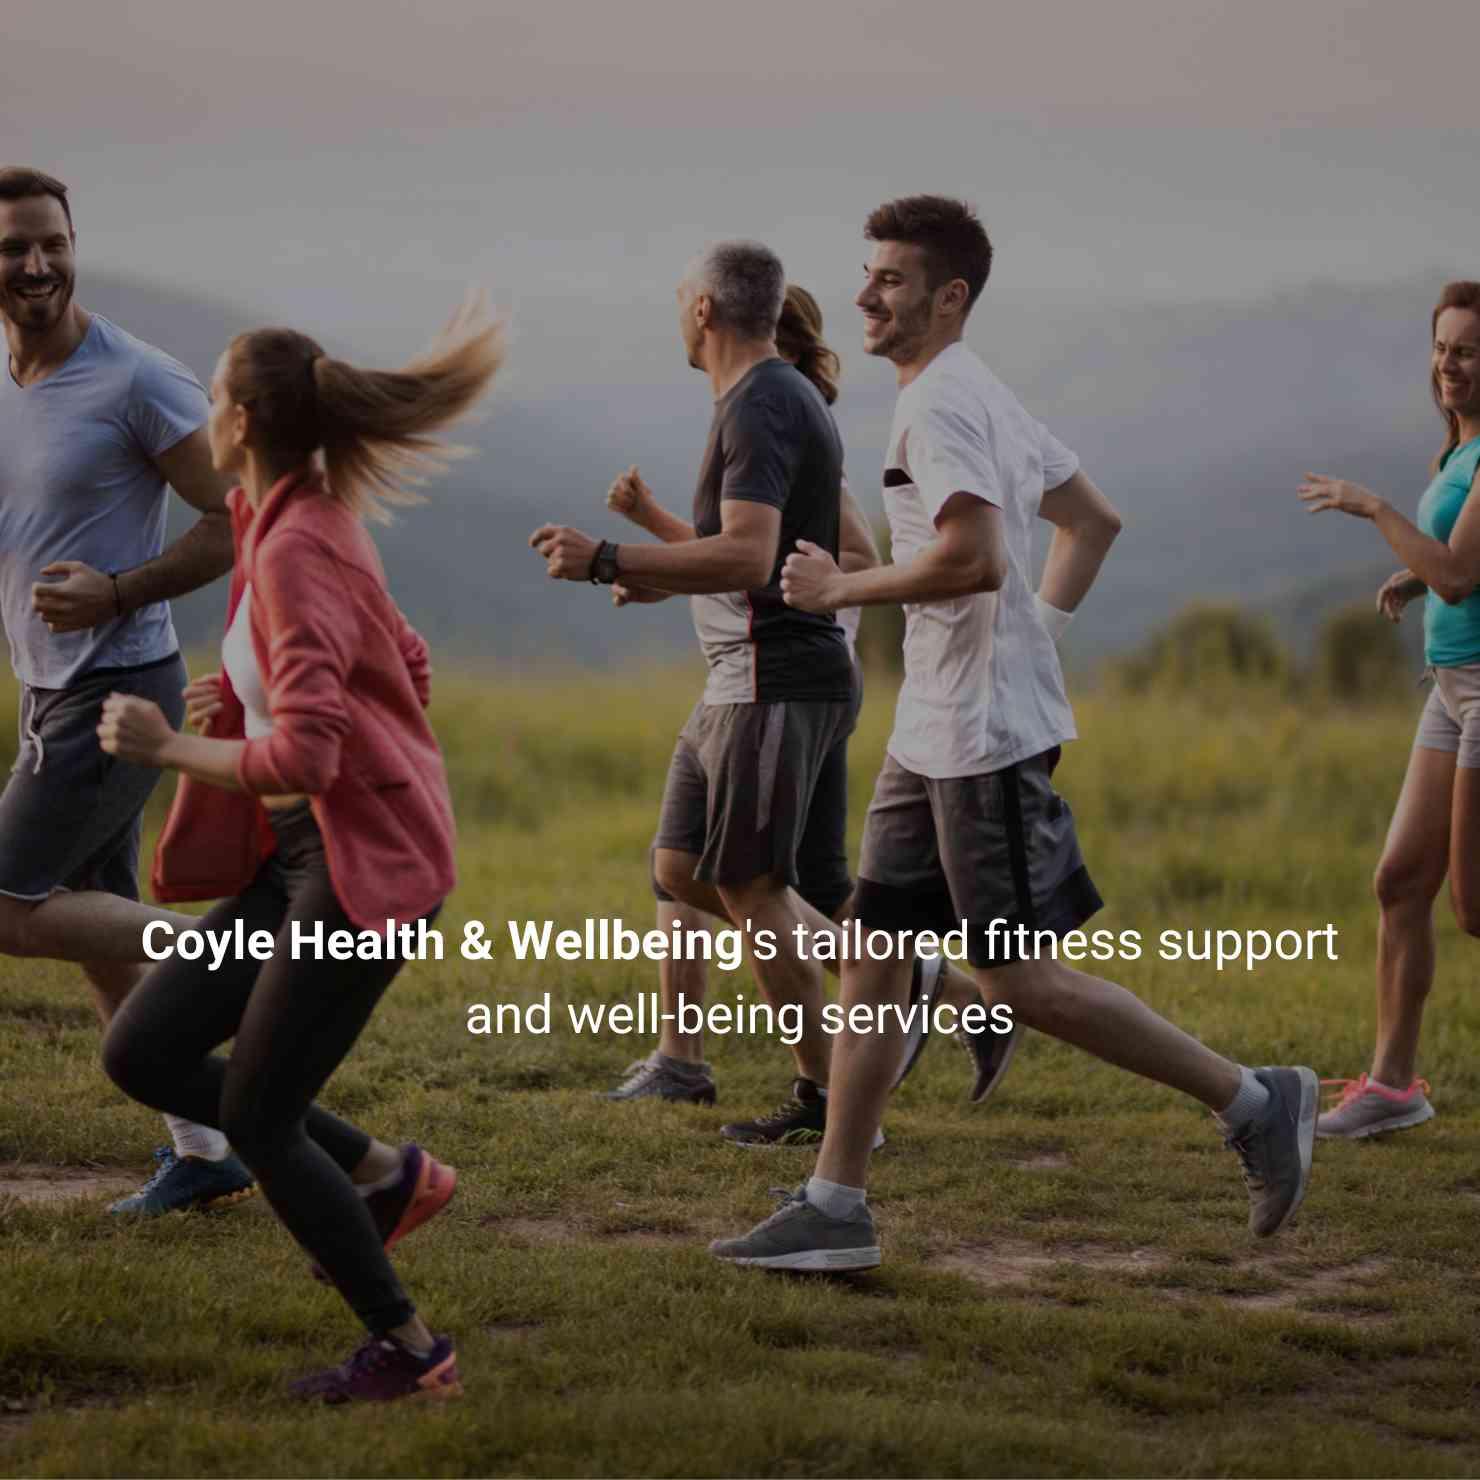 Coyle Health and Wellbeing